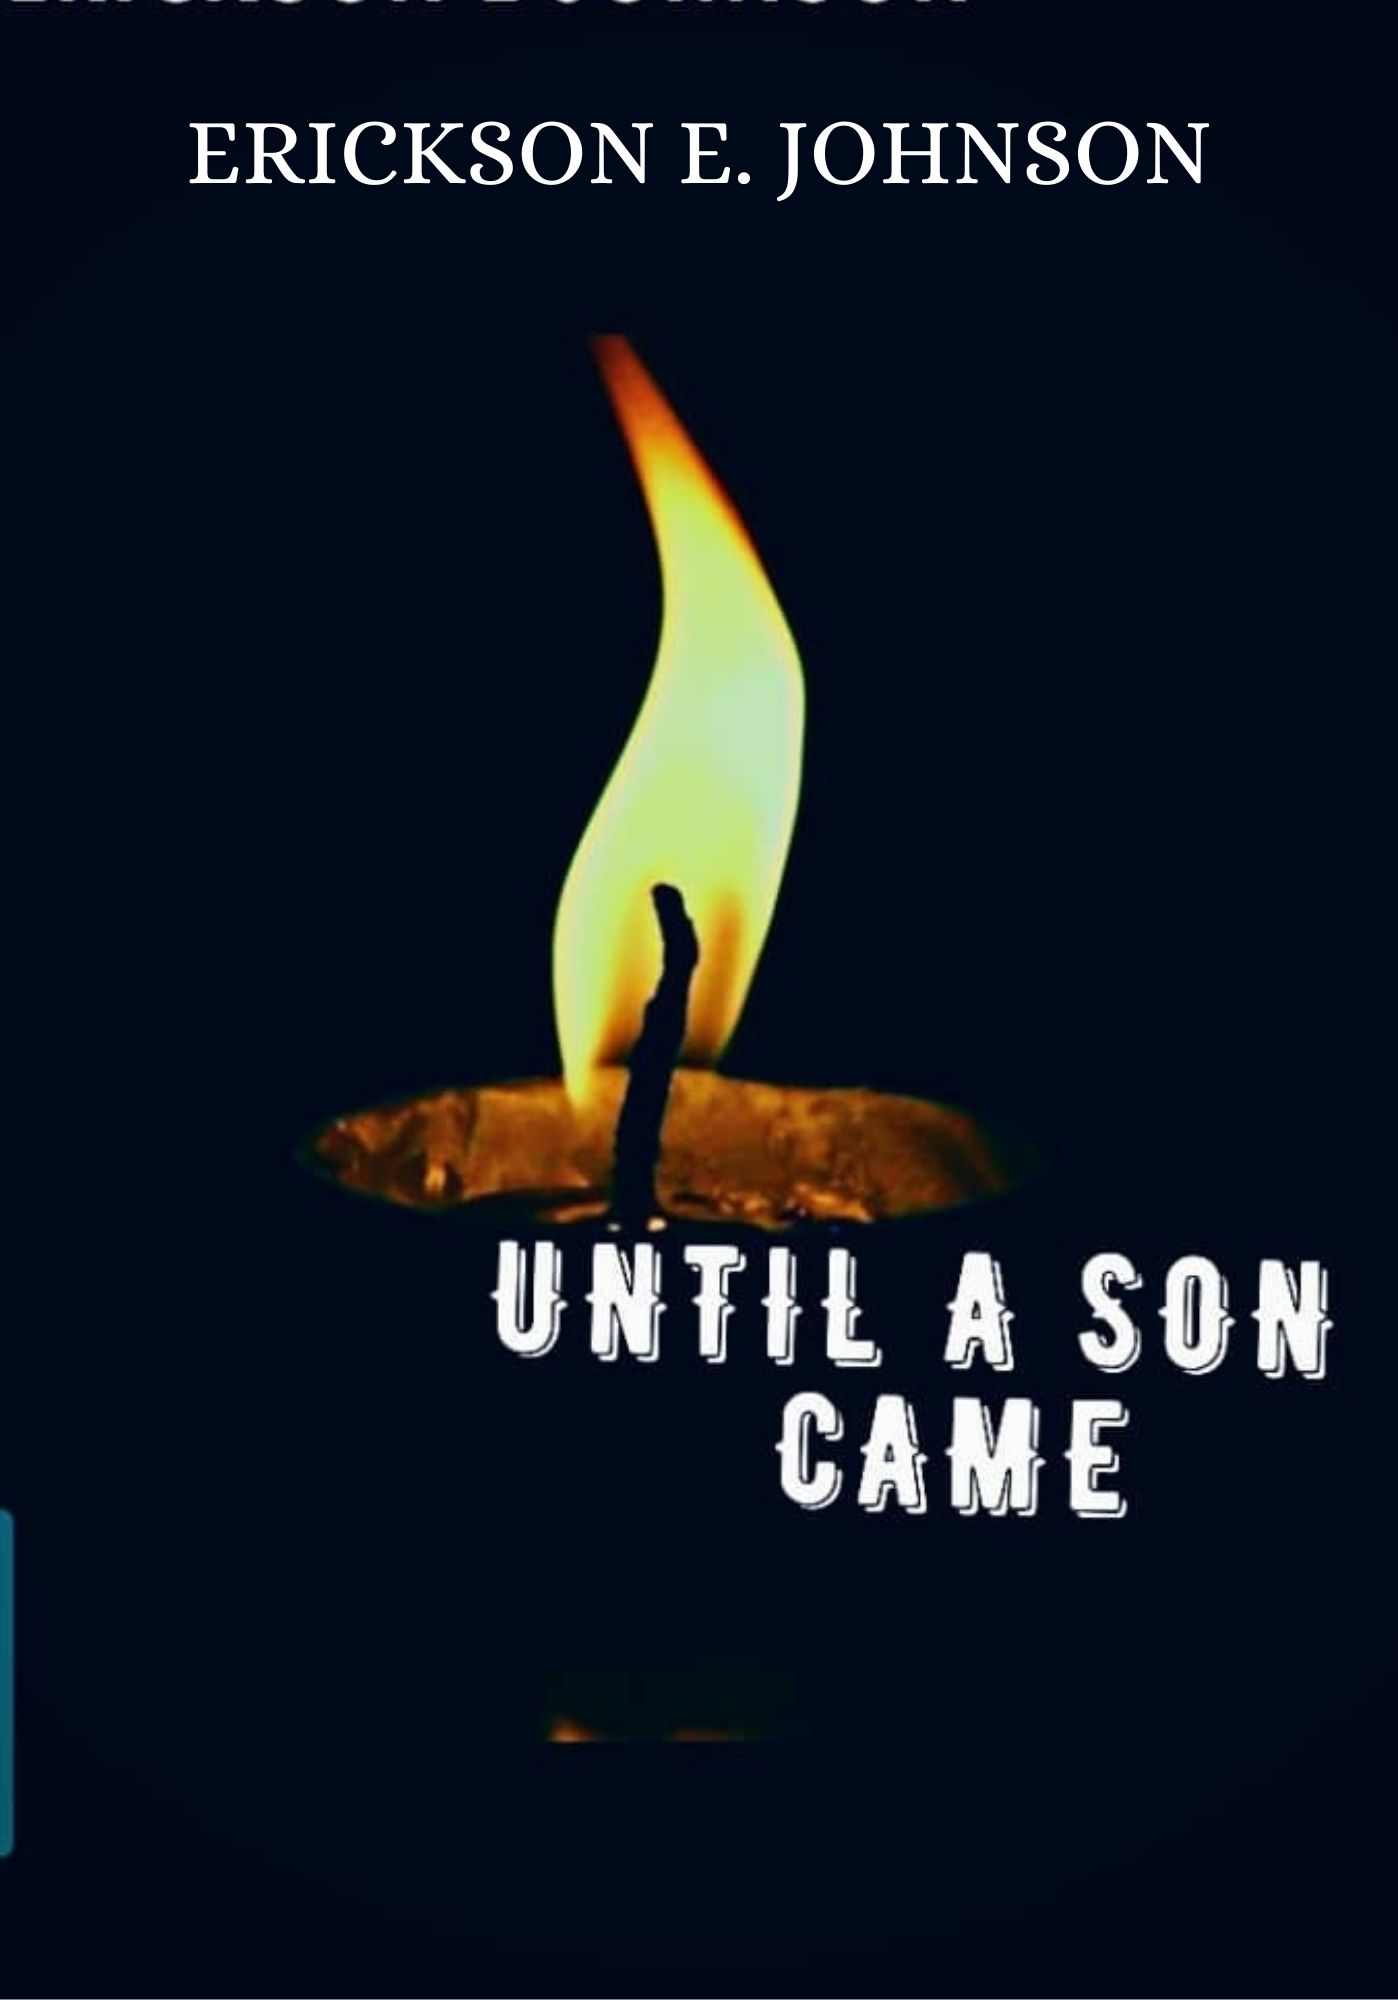 Cover - Until a son came